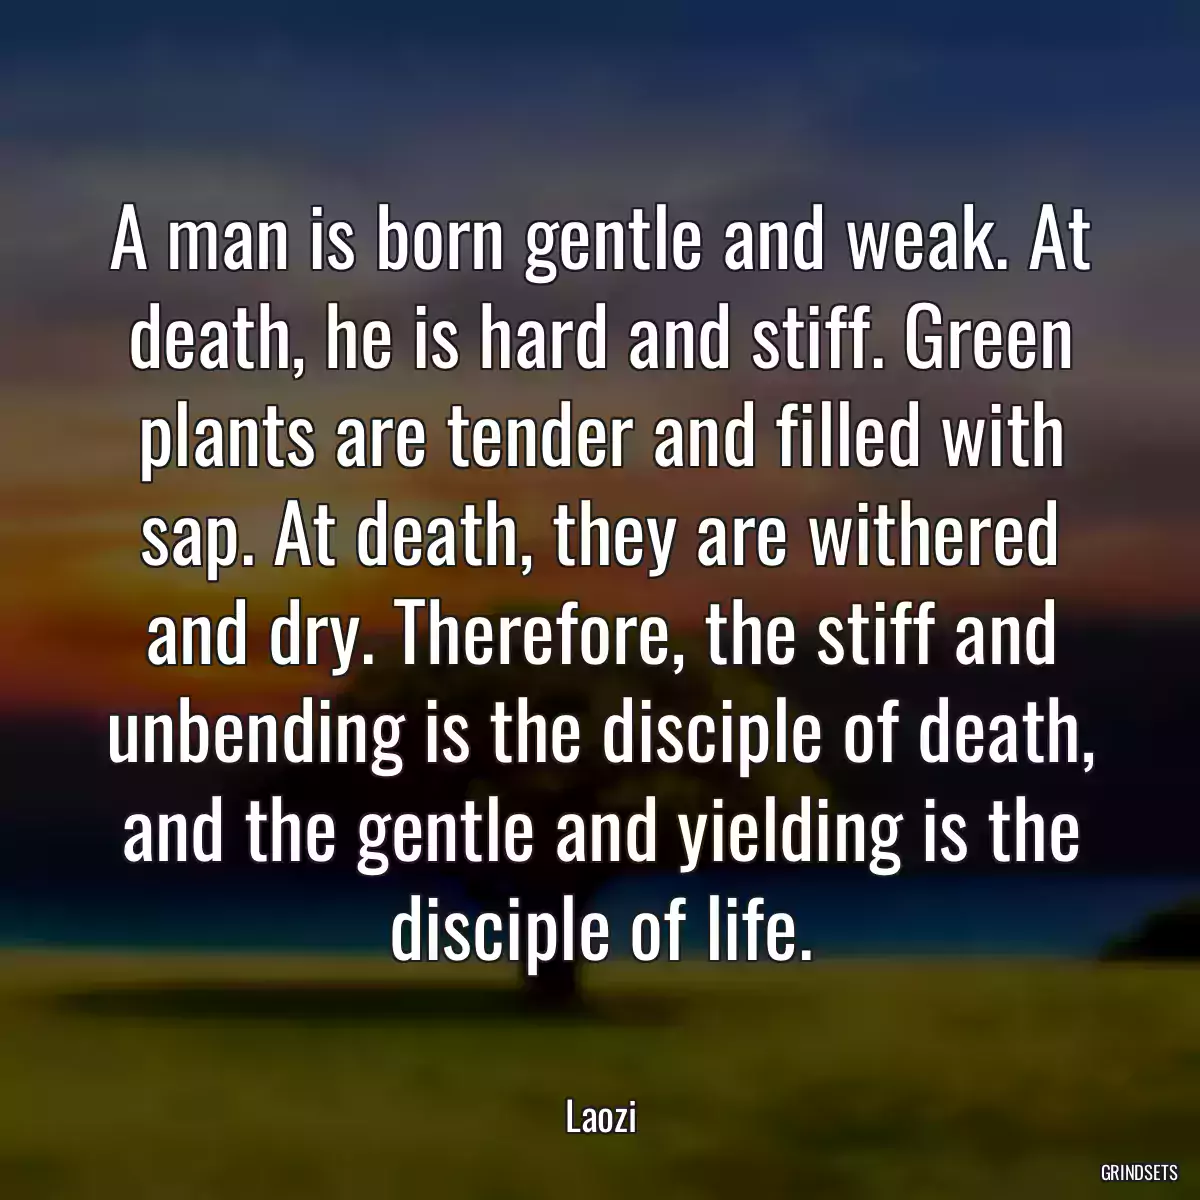 A man is born gentle and weak. At death, he is hard and stiff. Green plants are tender and filled with sap. At death, they are withered and dry. Therefore, the stiff and unbending is the disciple of death, and the gentle and yielding is the disciple of life.